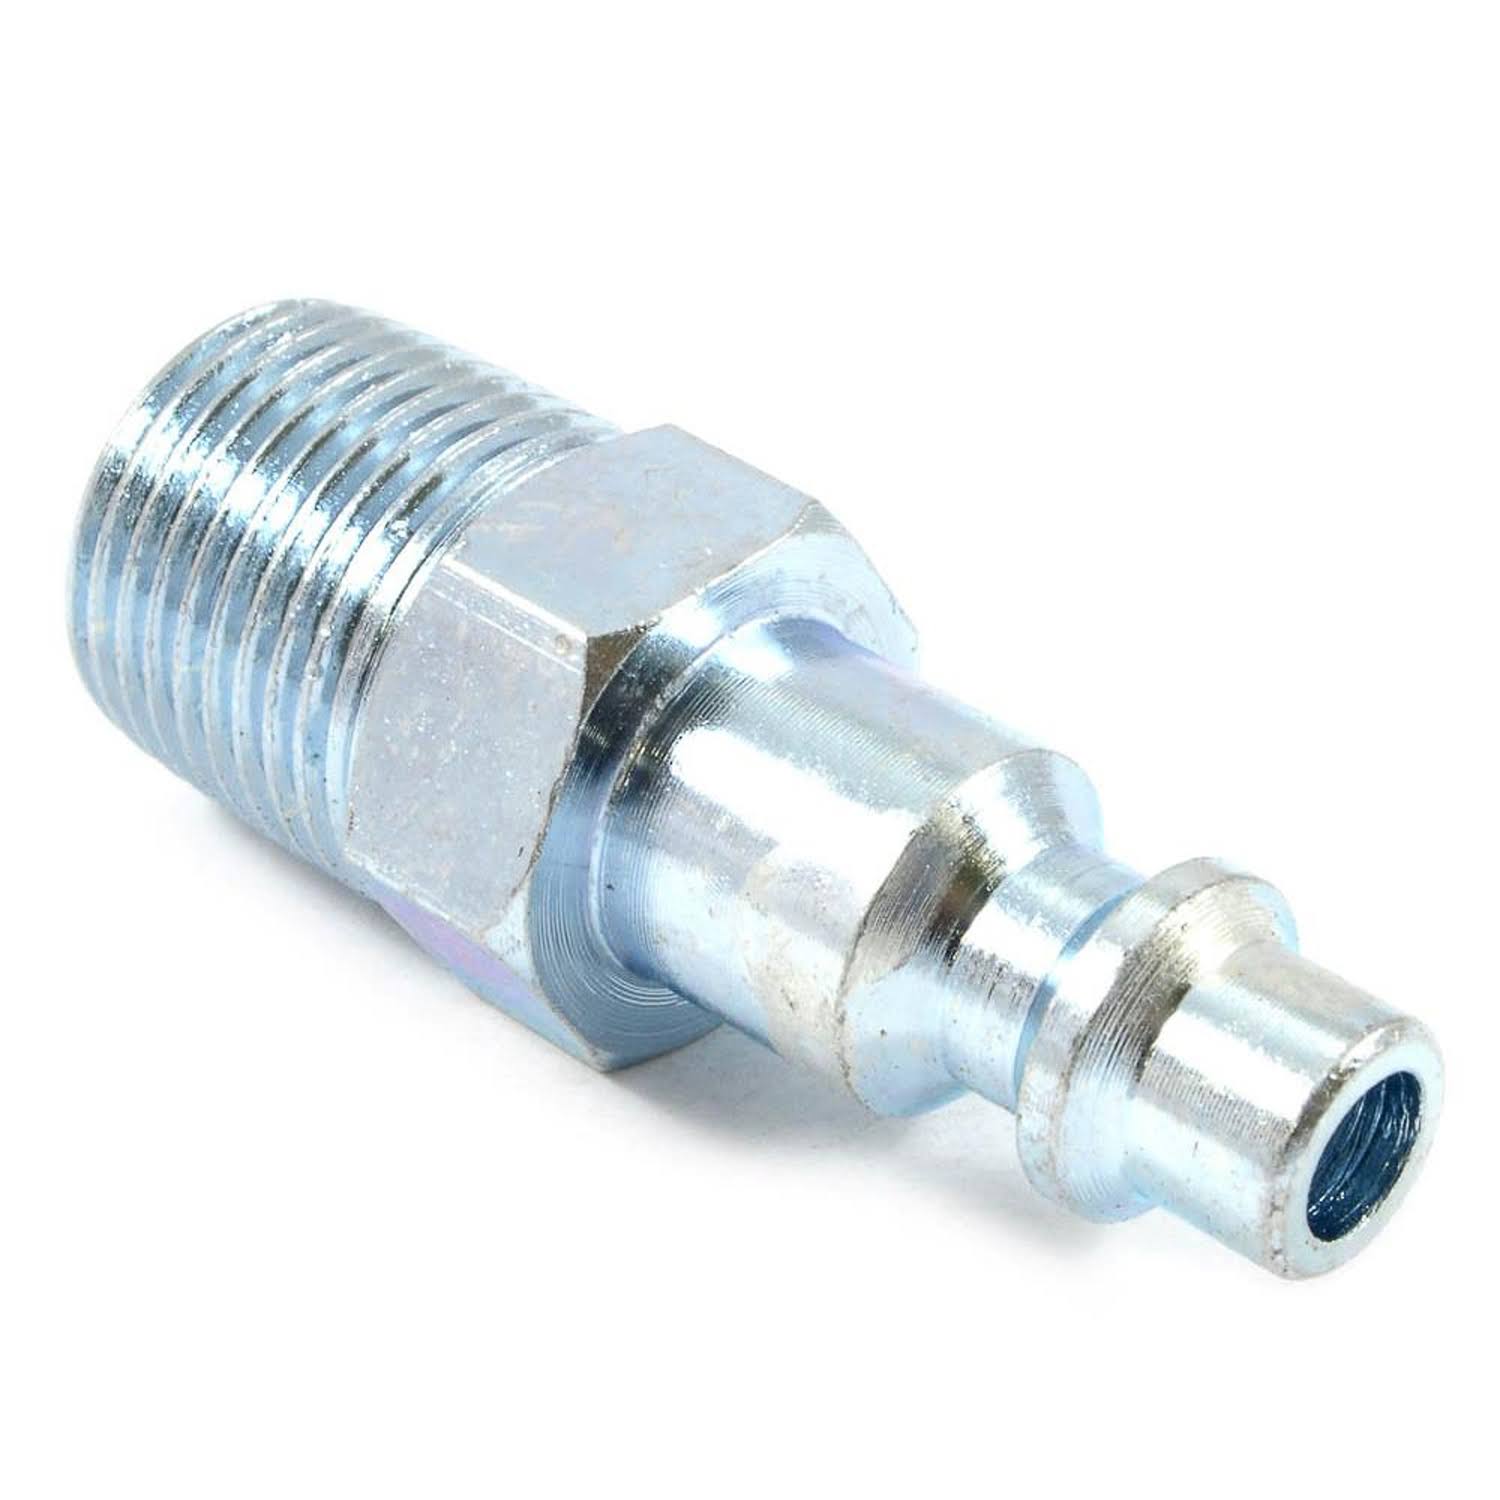 Forney 75471 Air Fitting Plug - Industrial Milton Style, 1/4" x 3/8" Male NPT